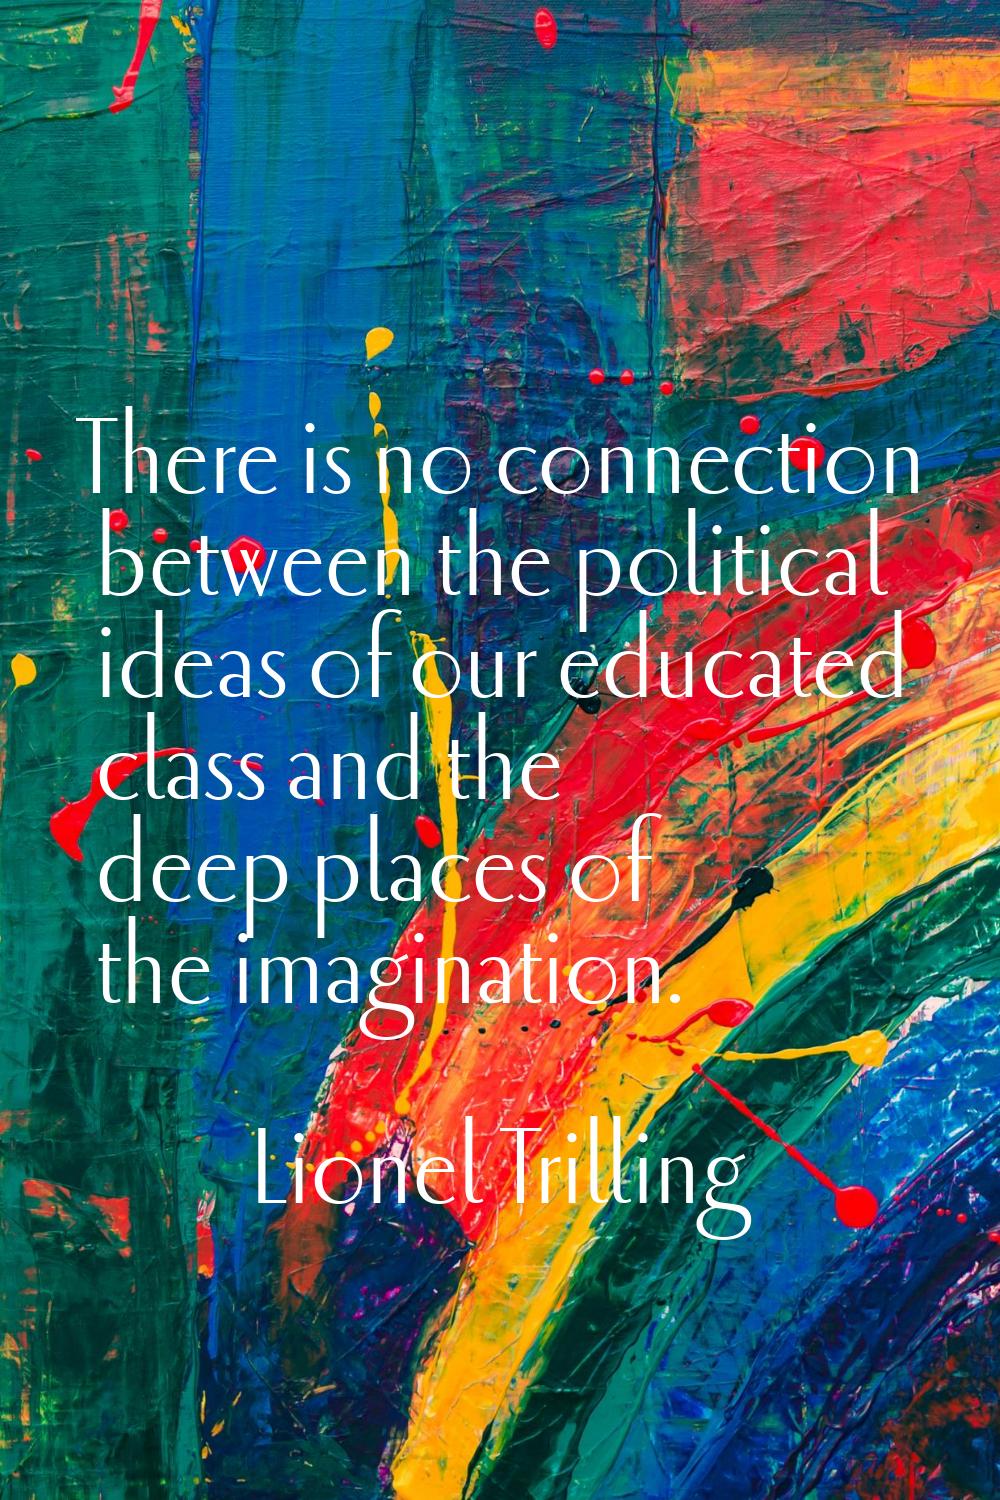 There is no connection between the political ideas of our educated class and the deep places of the